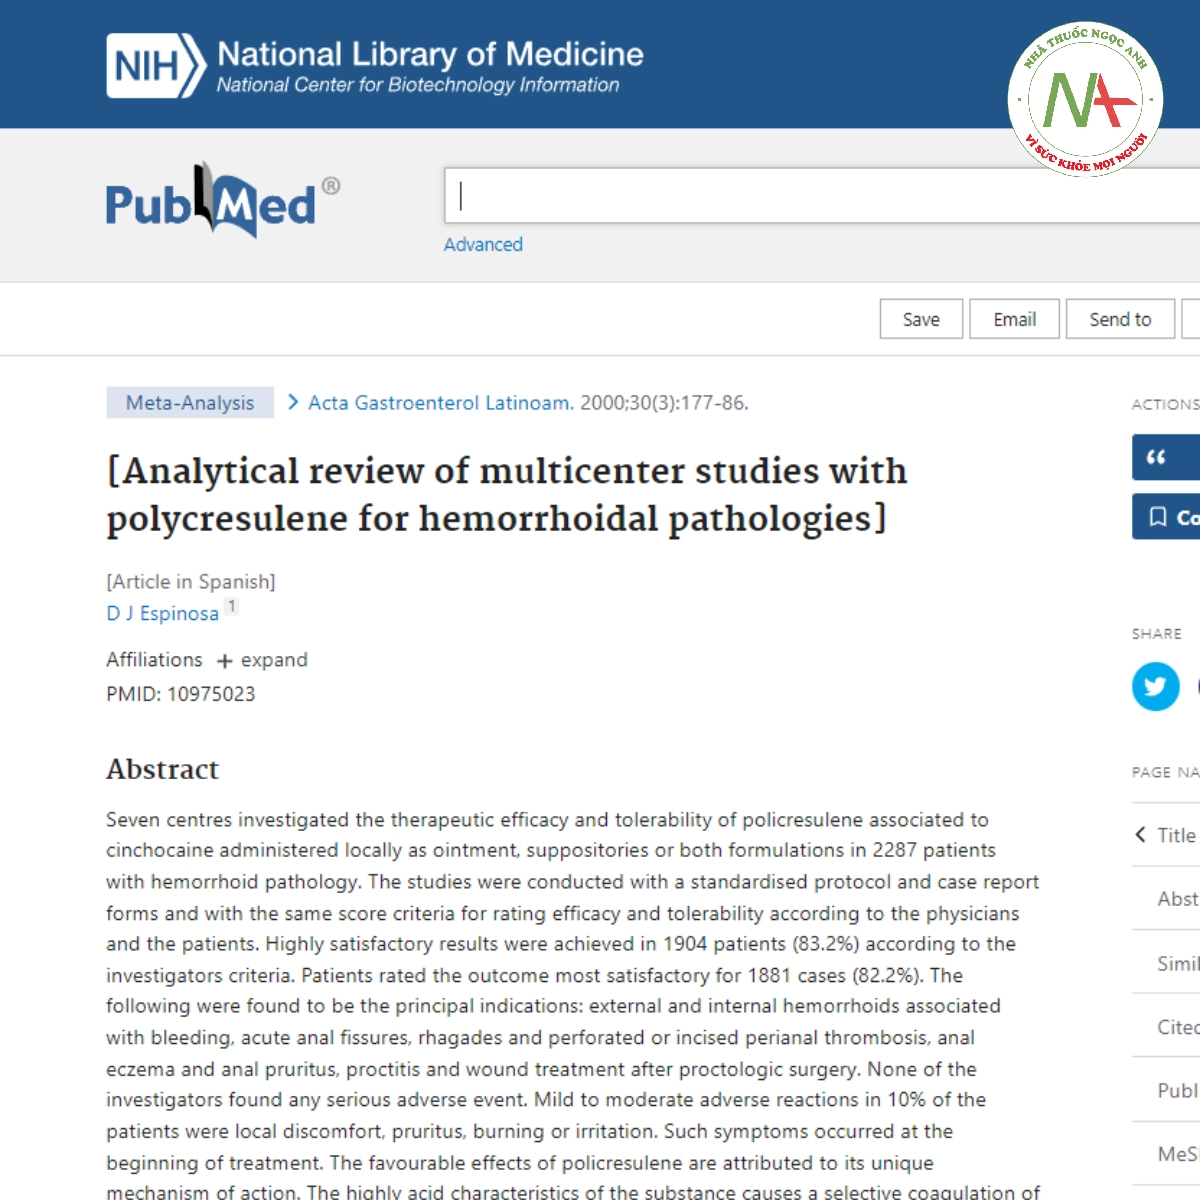 Analytical review of multicenter studies with polycresulene for hemorrhoidal pathologies